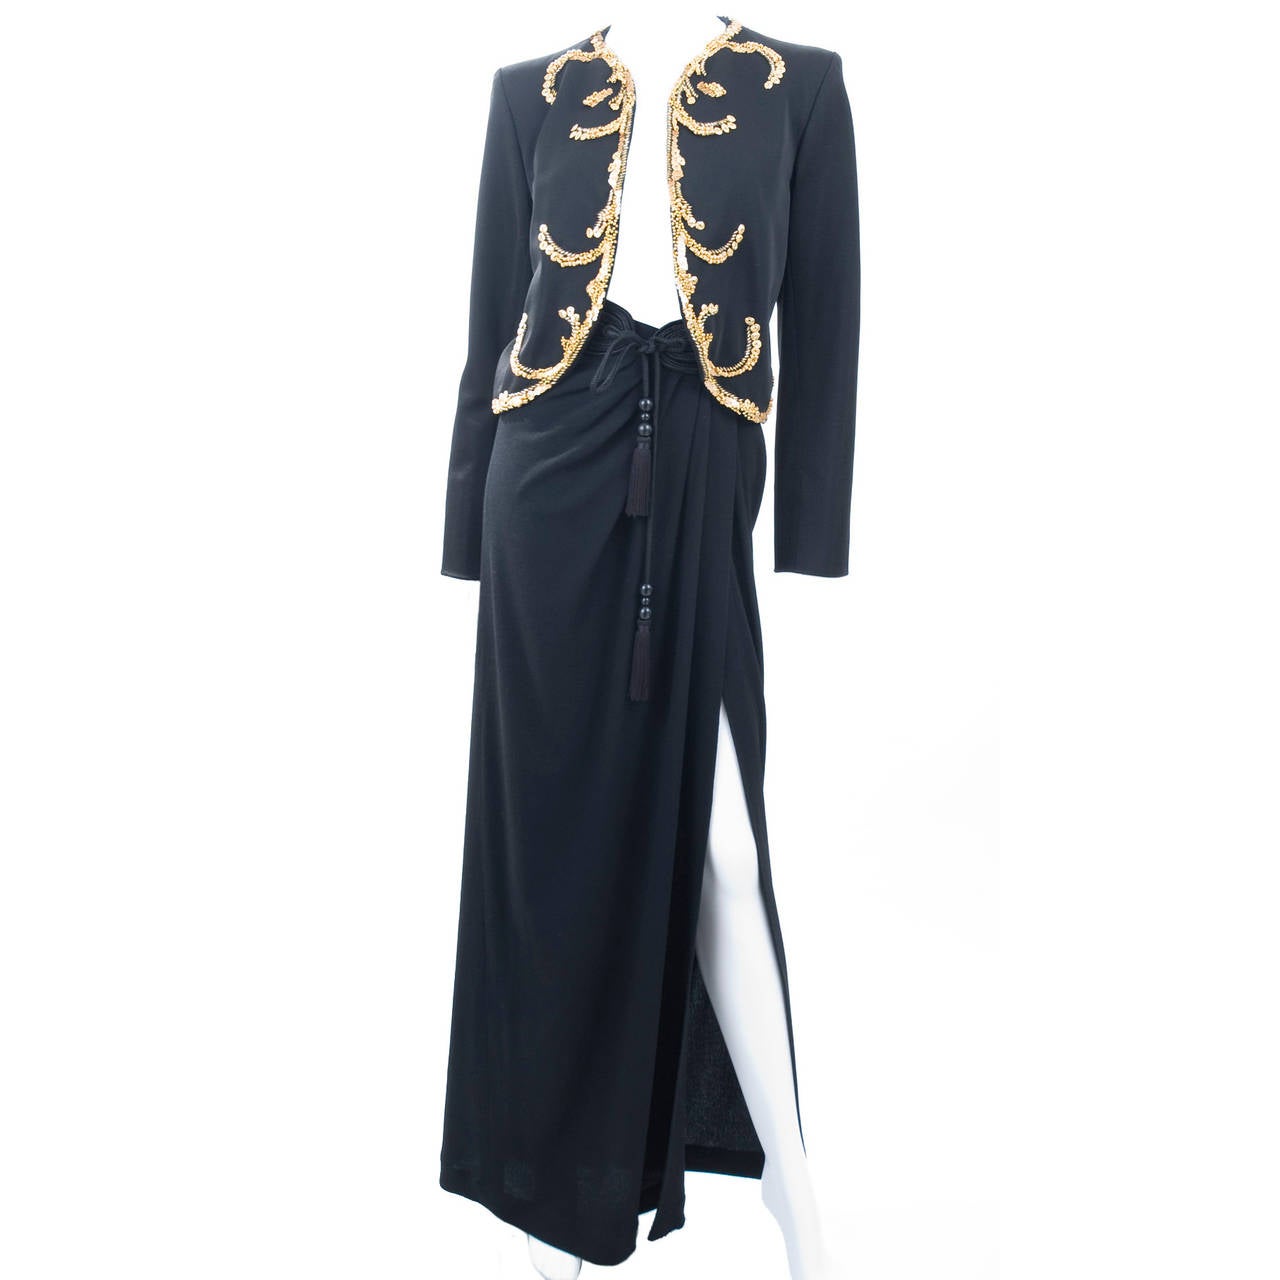 Rare Vintage Yves Saint Laurent Ensemble with Lesage Embroidery at 1stdibs